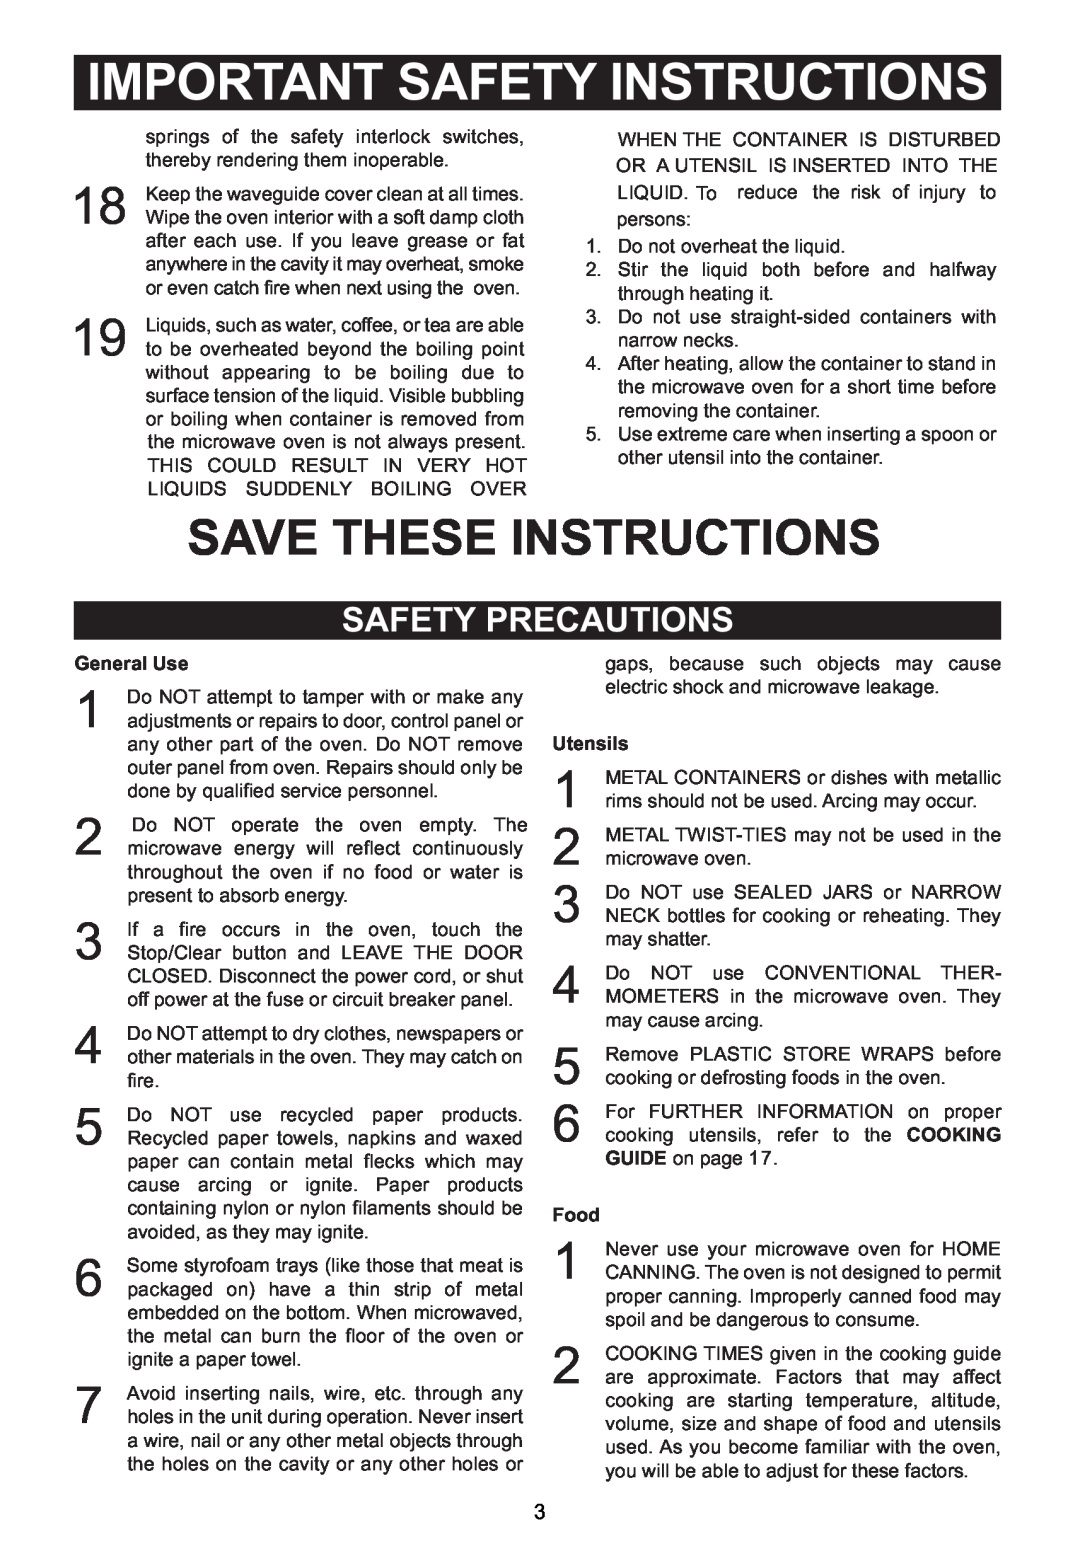 Emerson MW1161SB Safety Precautions, Important Safety Instructions, Save These Instructions, General Use, Utensils, Food 